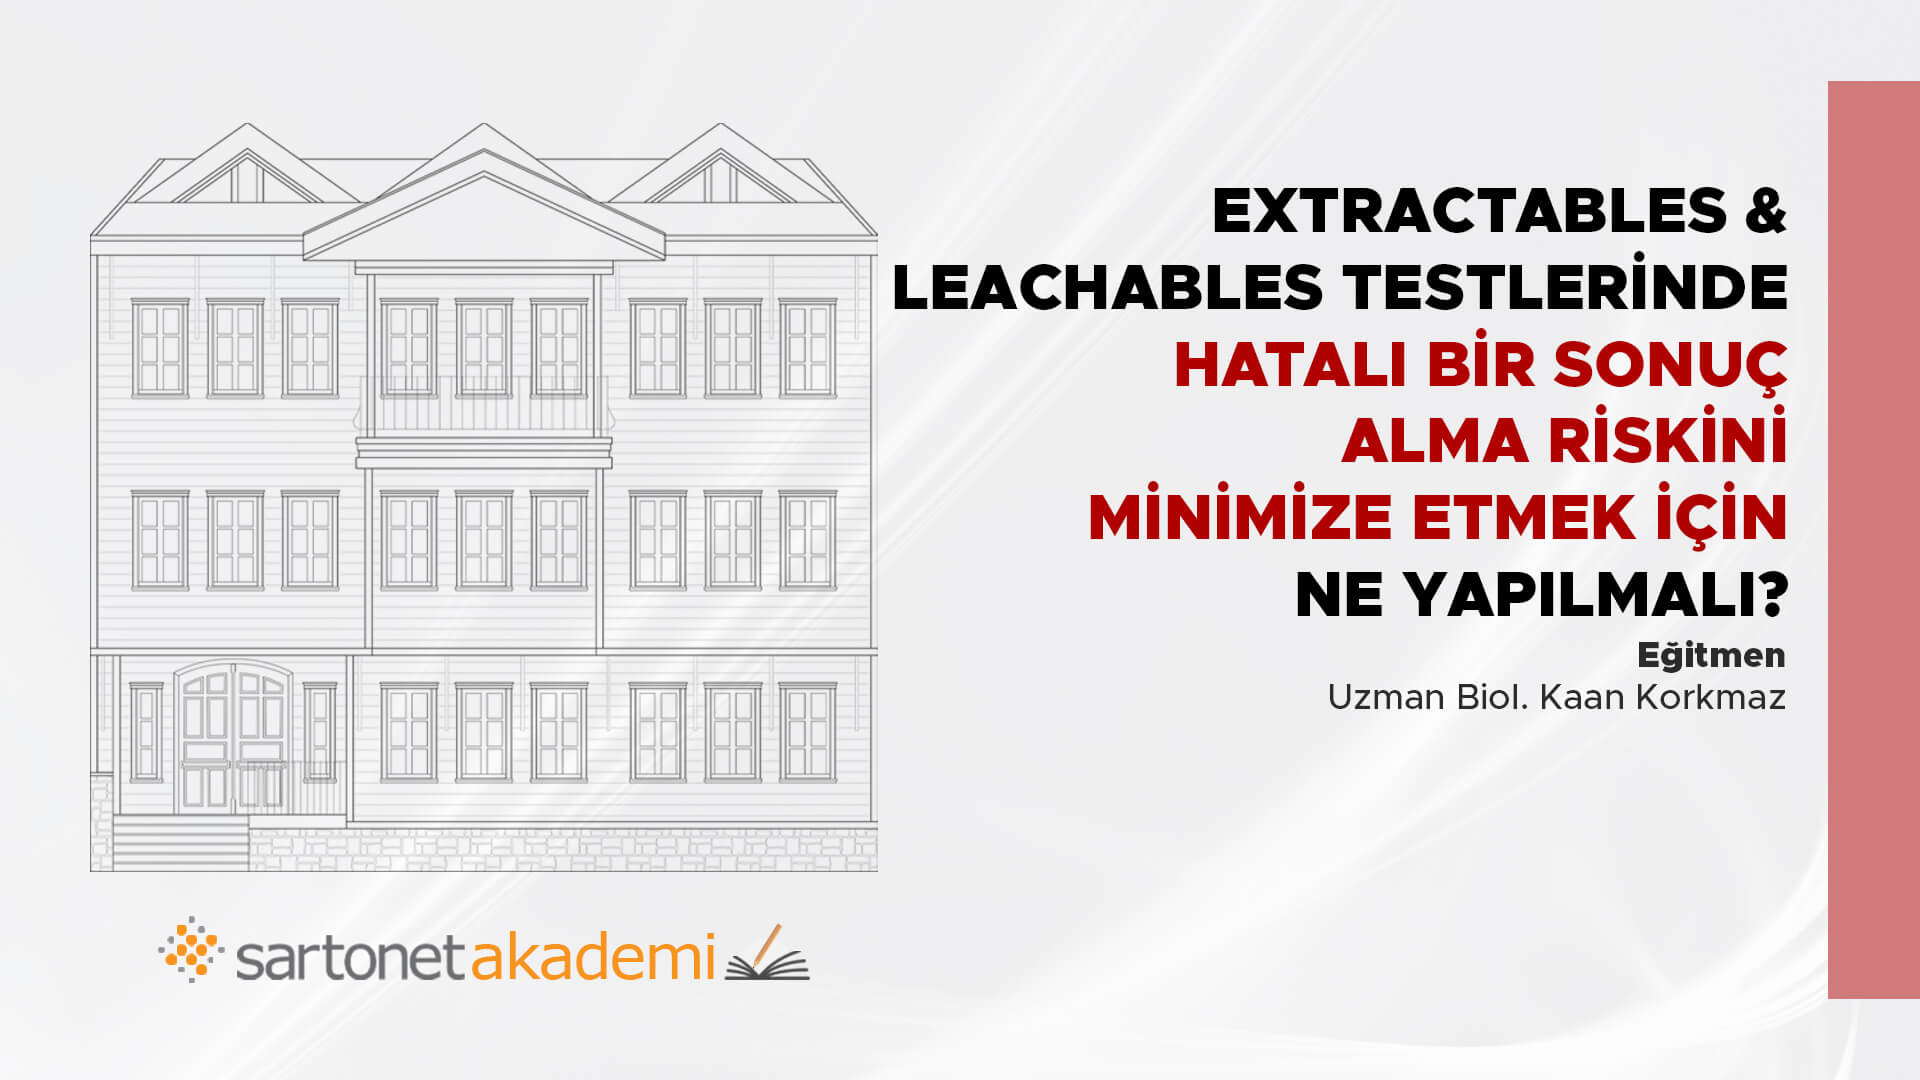 Extractables&Leachables testlerinde